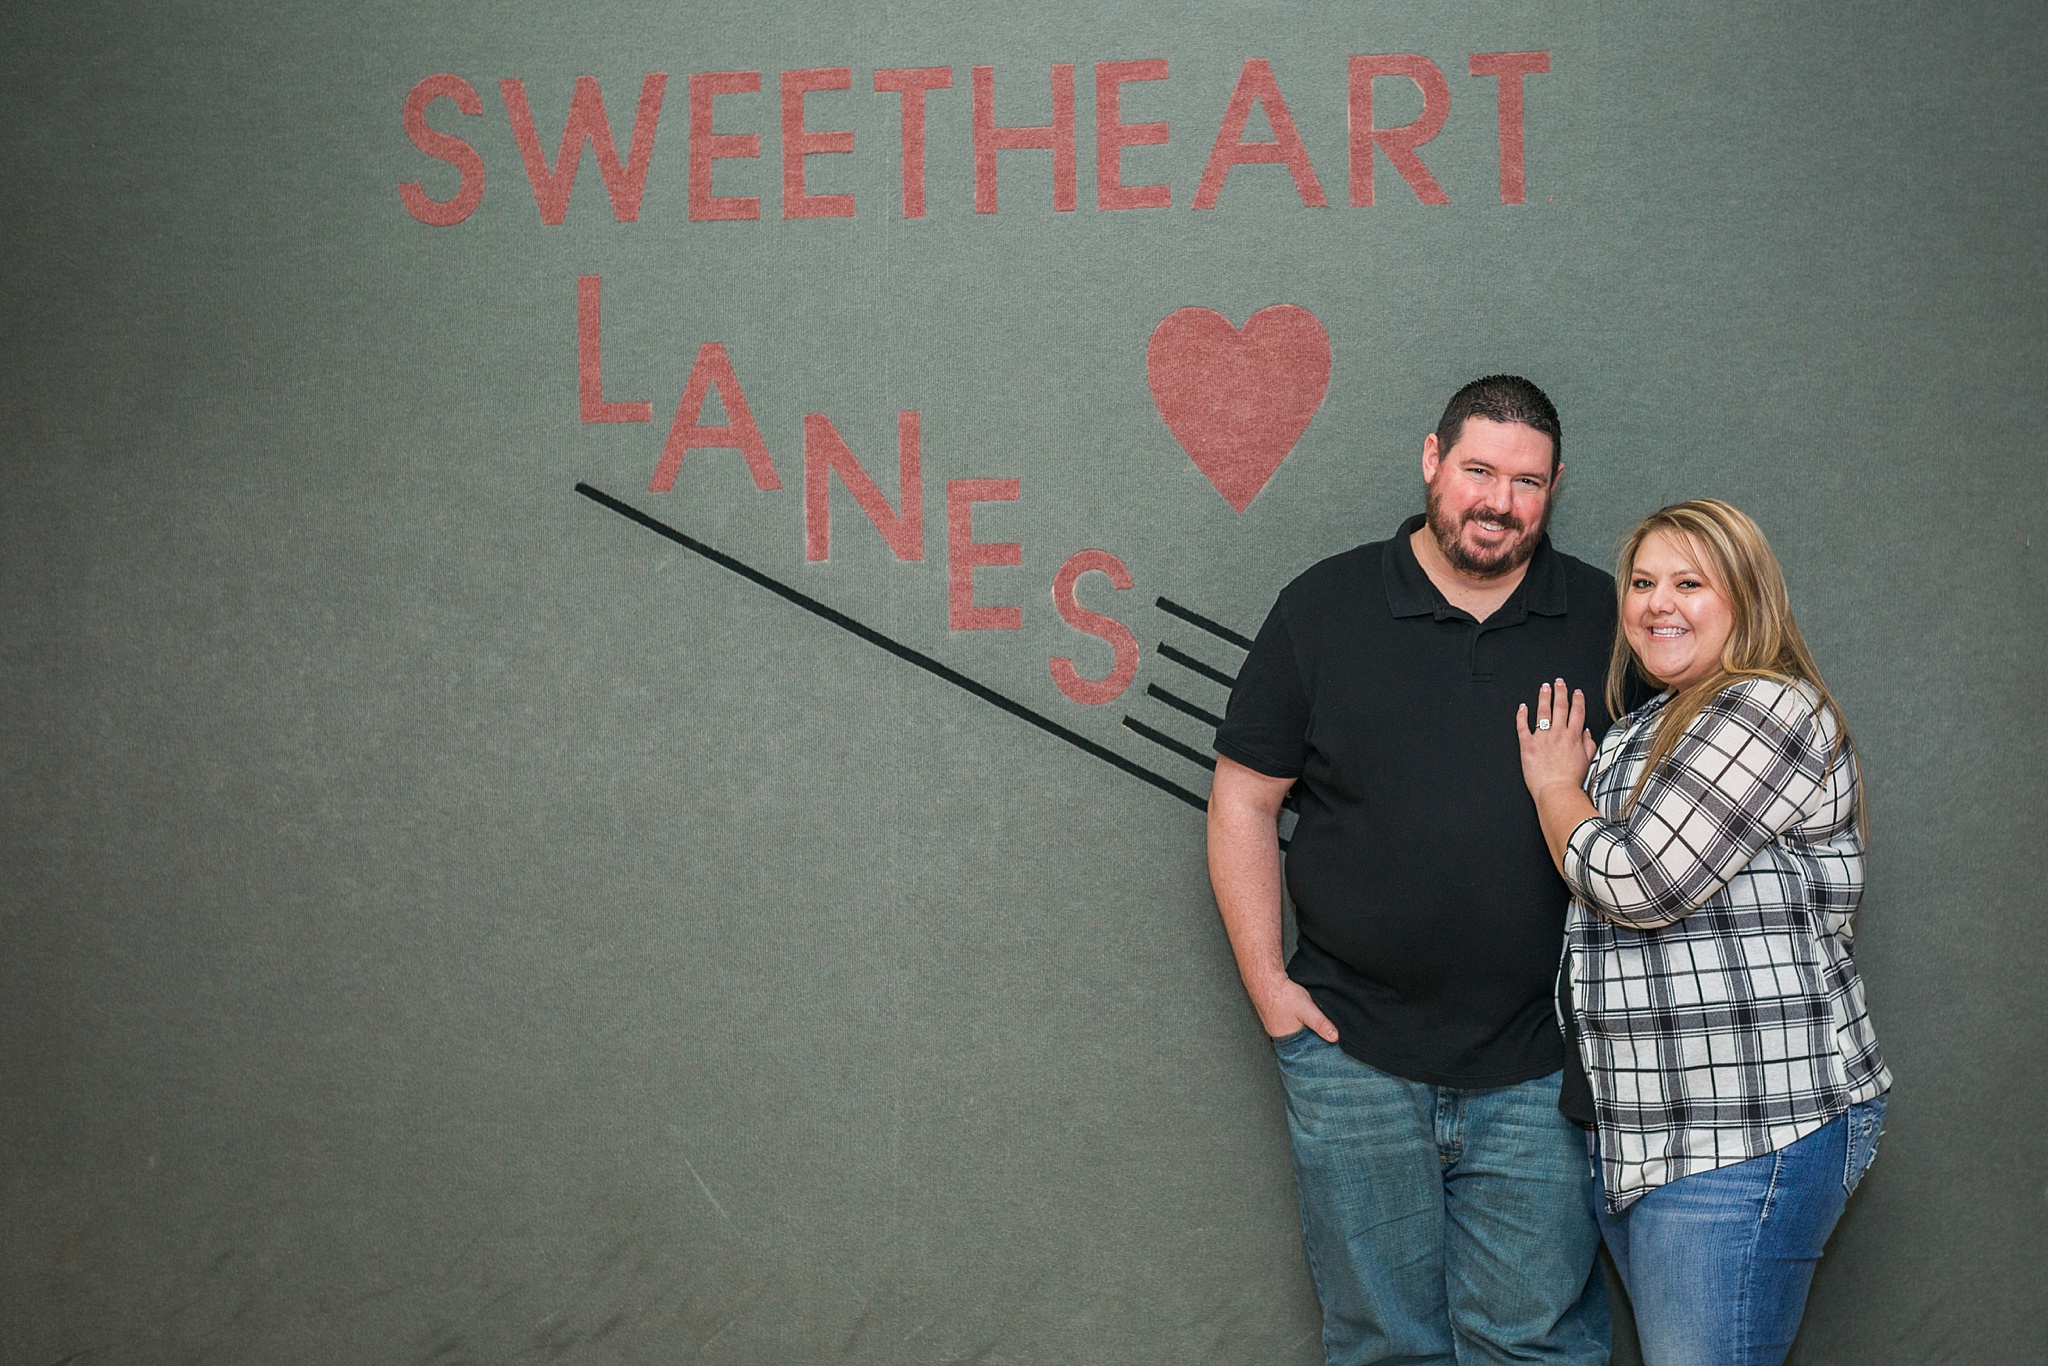 Couple standing in front of sign during their bowling alley engagement session. Briana & Kevin’s Devil’s Backbone and Sweetheart Lanes Engagement Session by Colorado Engagement Photographer, Jennifer Garza. Devil's Backbone Engagement, Devil's Backbone Engagement Session, Loveland Engagement Session, Colorado Engagement Photography, Colorado Engagement Photos, Sweetheart Lanes Bowling Alley, Bowling Alley Engagement, Bowling Engagement Session, Bowling Engagement Photography, Wedding Inspo, Colorado Wedding, Colorado Bride, Brides of Colorado, Bride to Be, Couples Goals